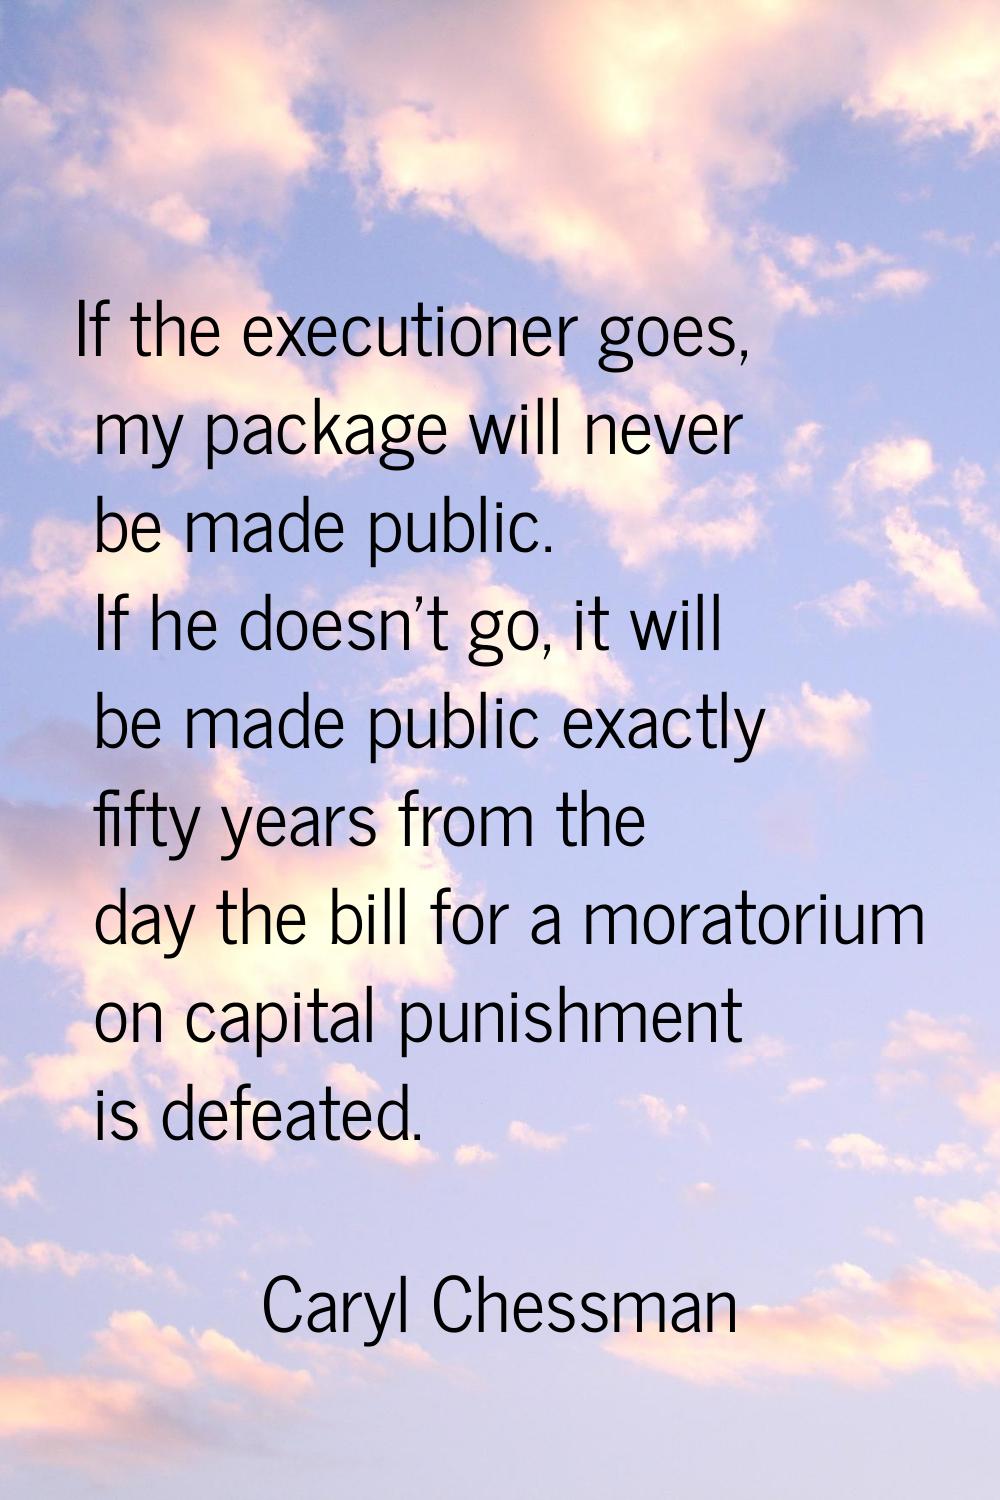 If the executioner goes, my package will never be made public. If he doesn't go, it will be made pu